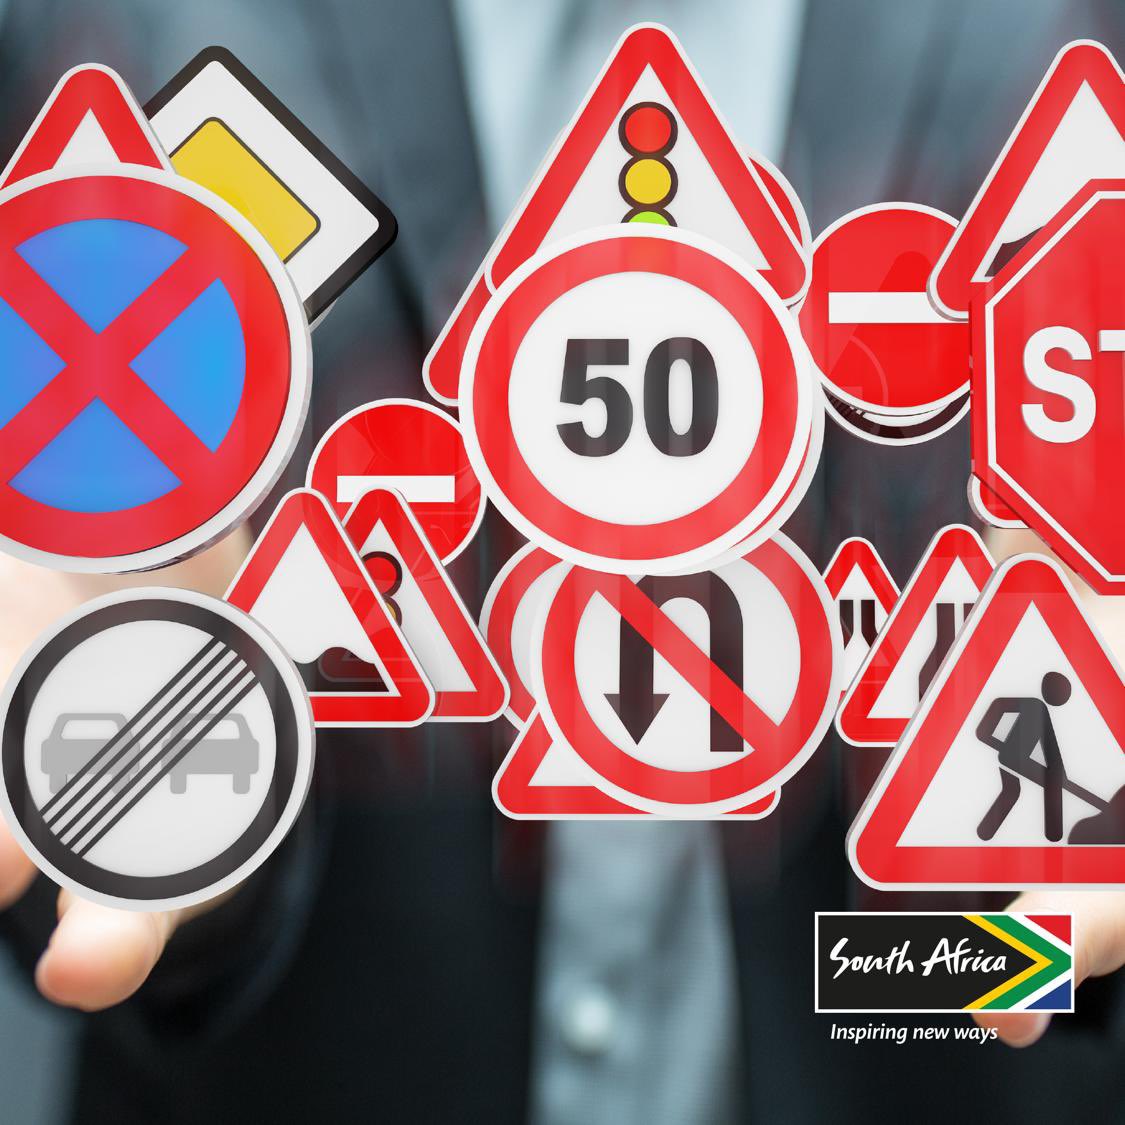 Buckle up, Mzansi! This Easter weekend, make road safety your top priority! Whether you're cruising to a family getaway or zipping through city streets, remember: speed limits are your friend, seat belts are a must, and always keep your eyes on the road ahead. Here's to a…